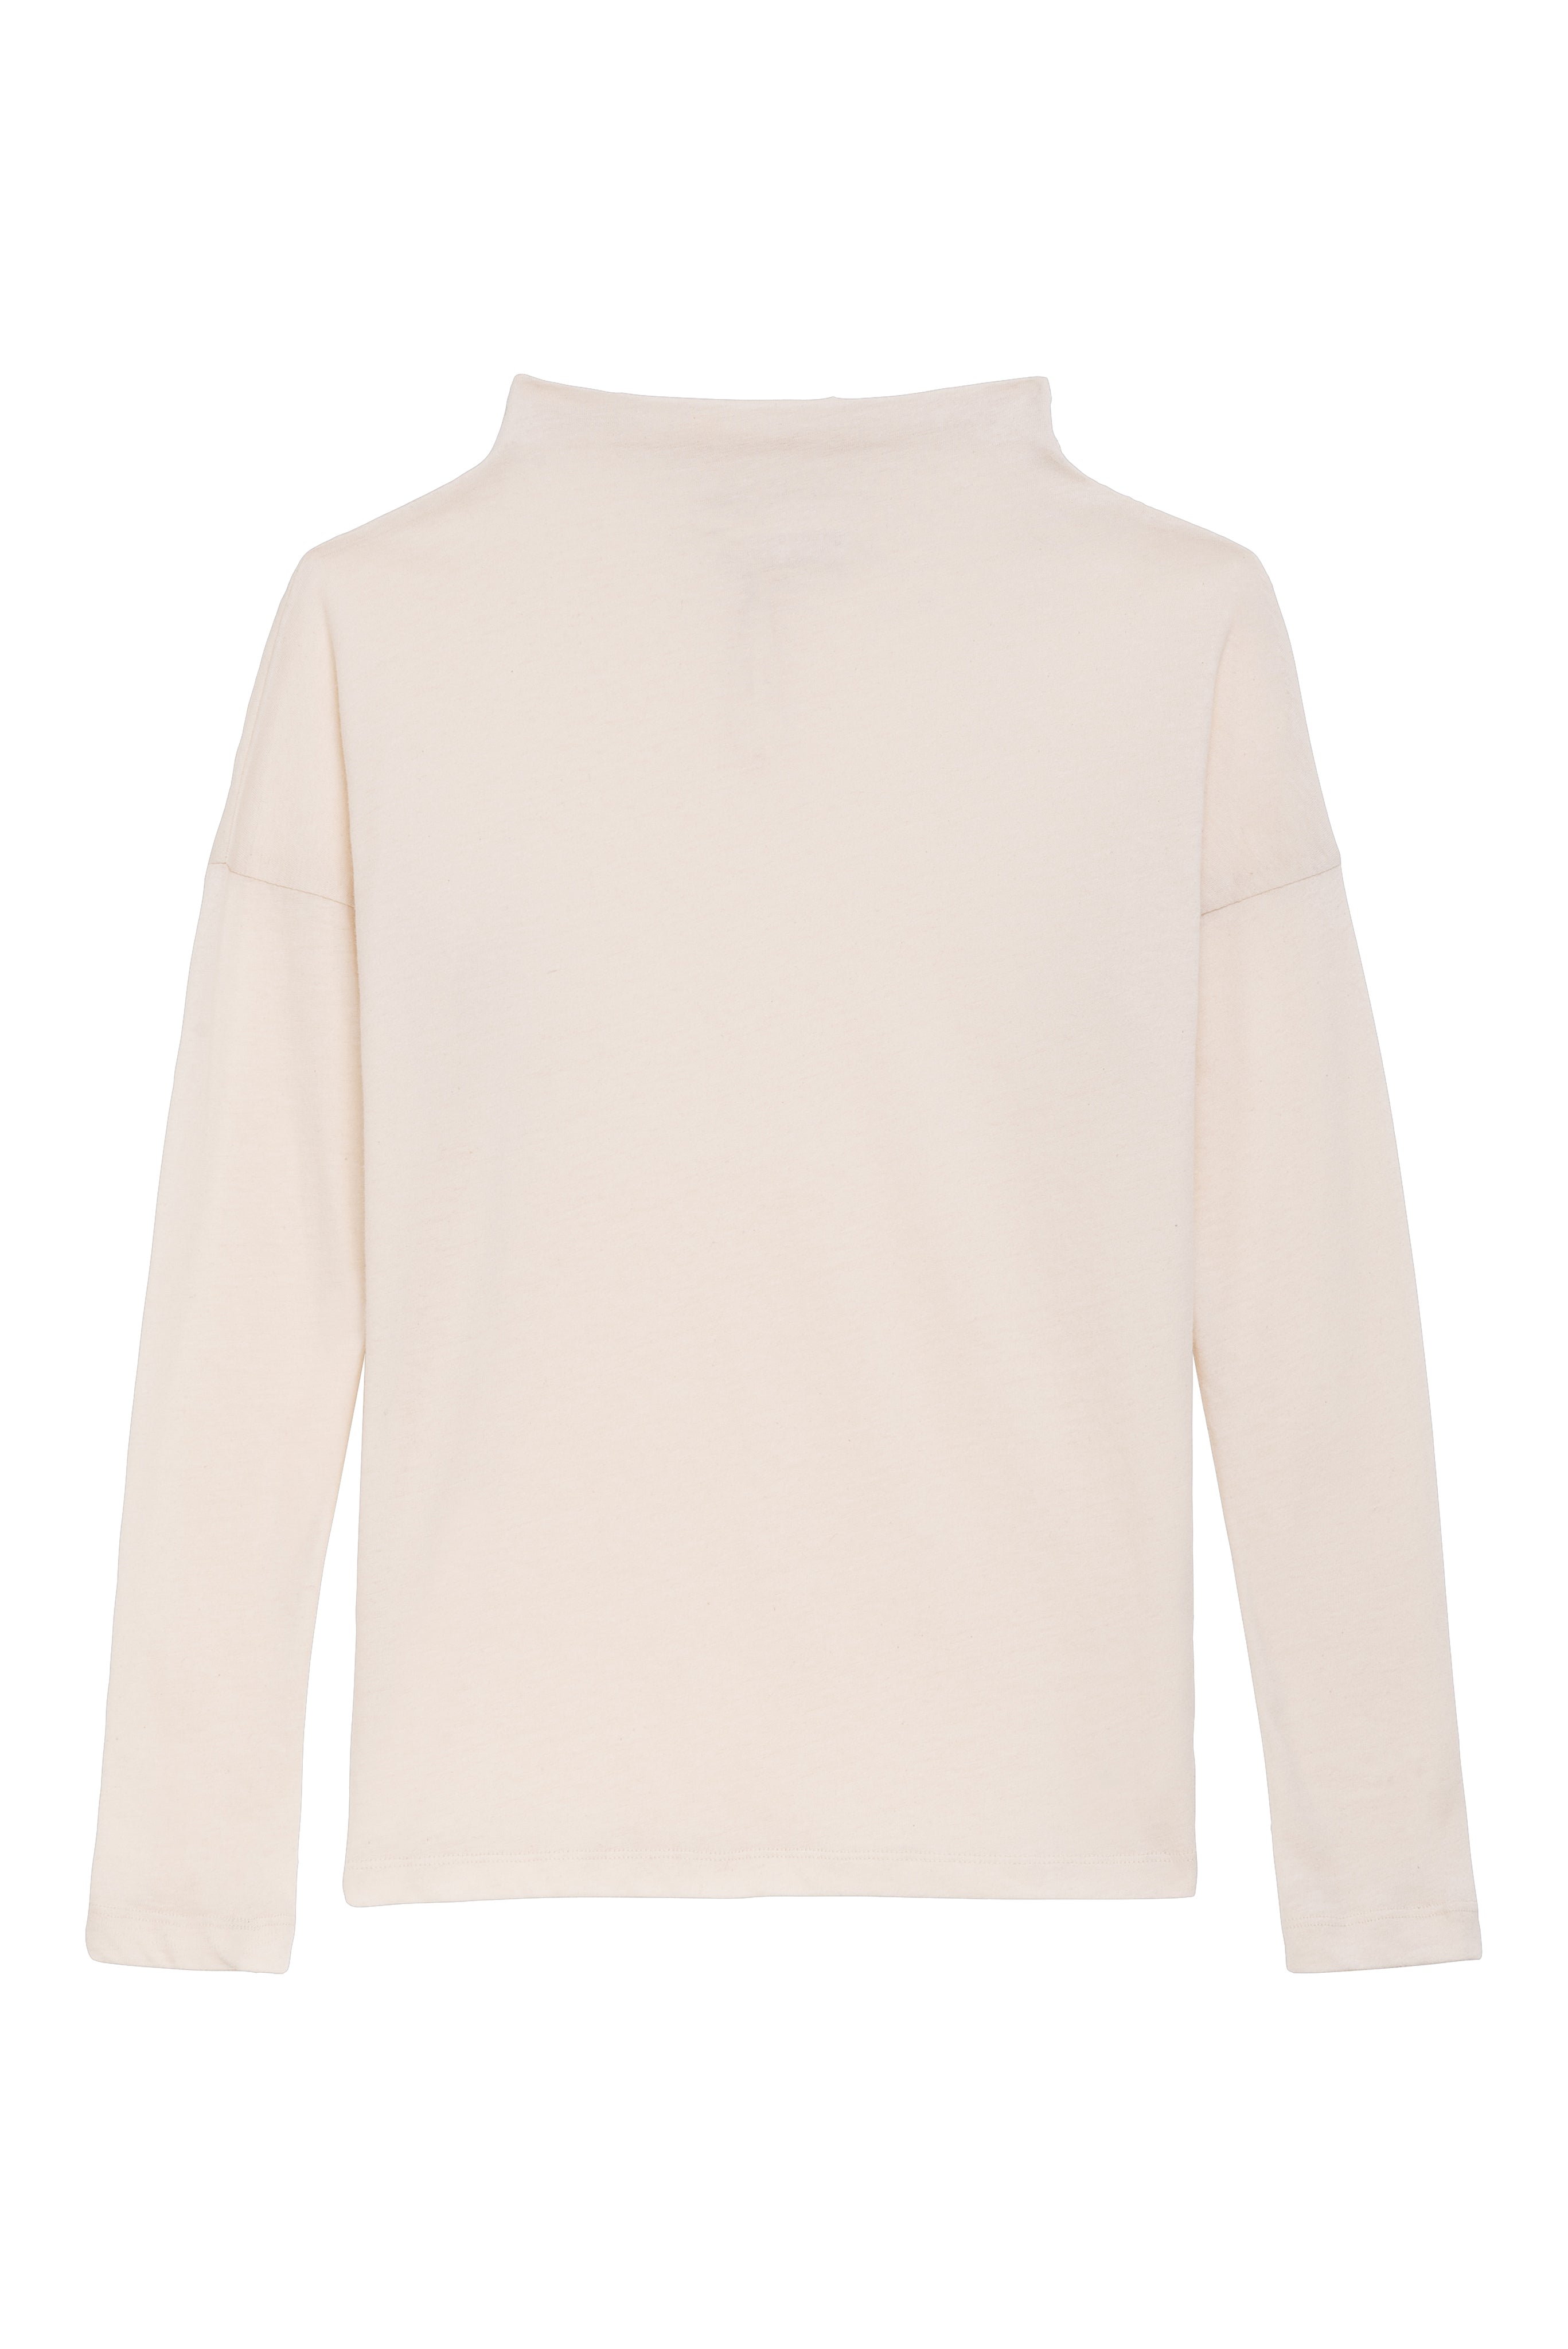 Stand-up collar shirt in a cashmere mix